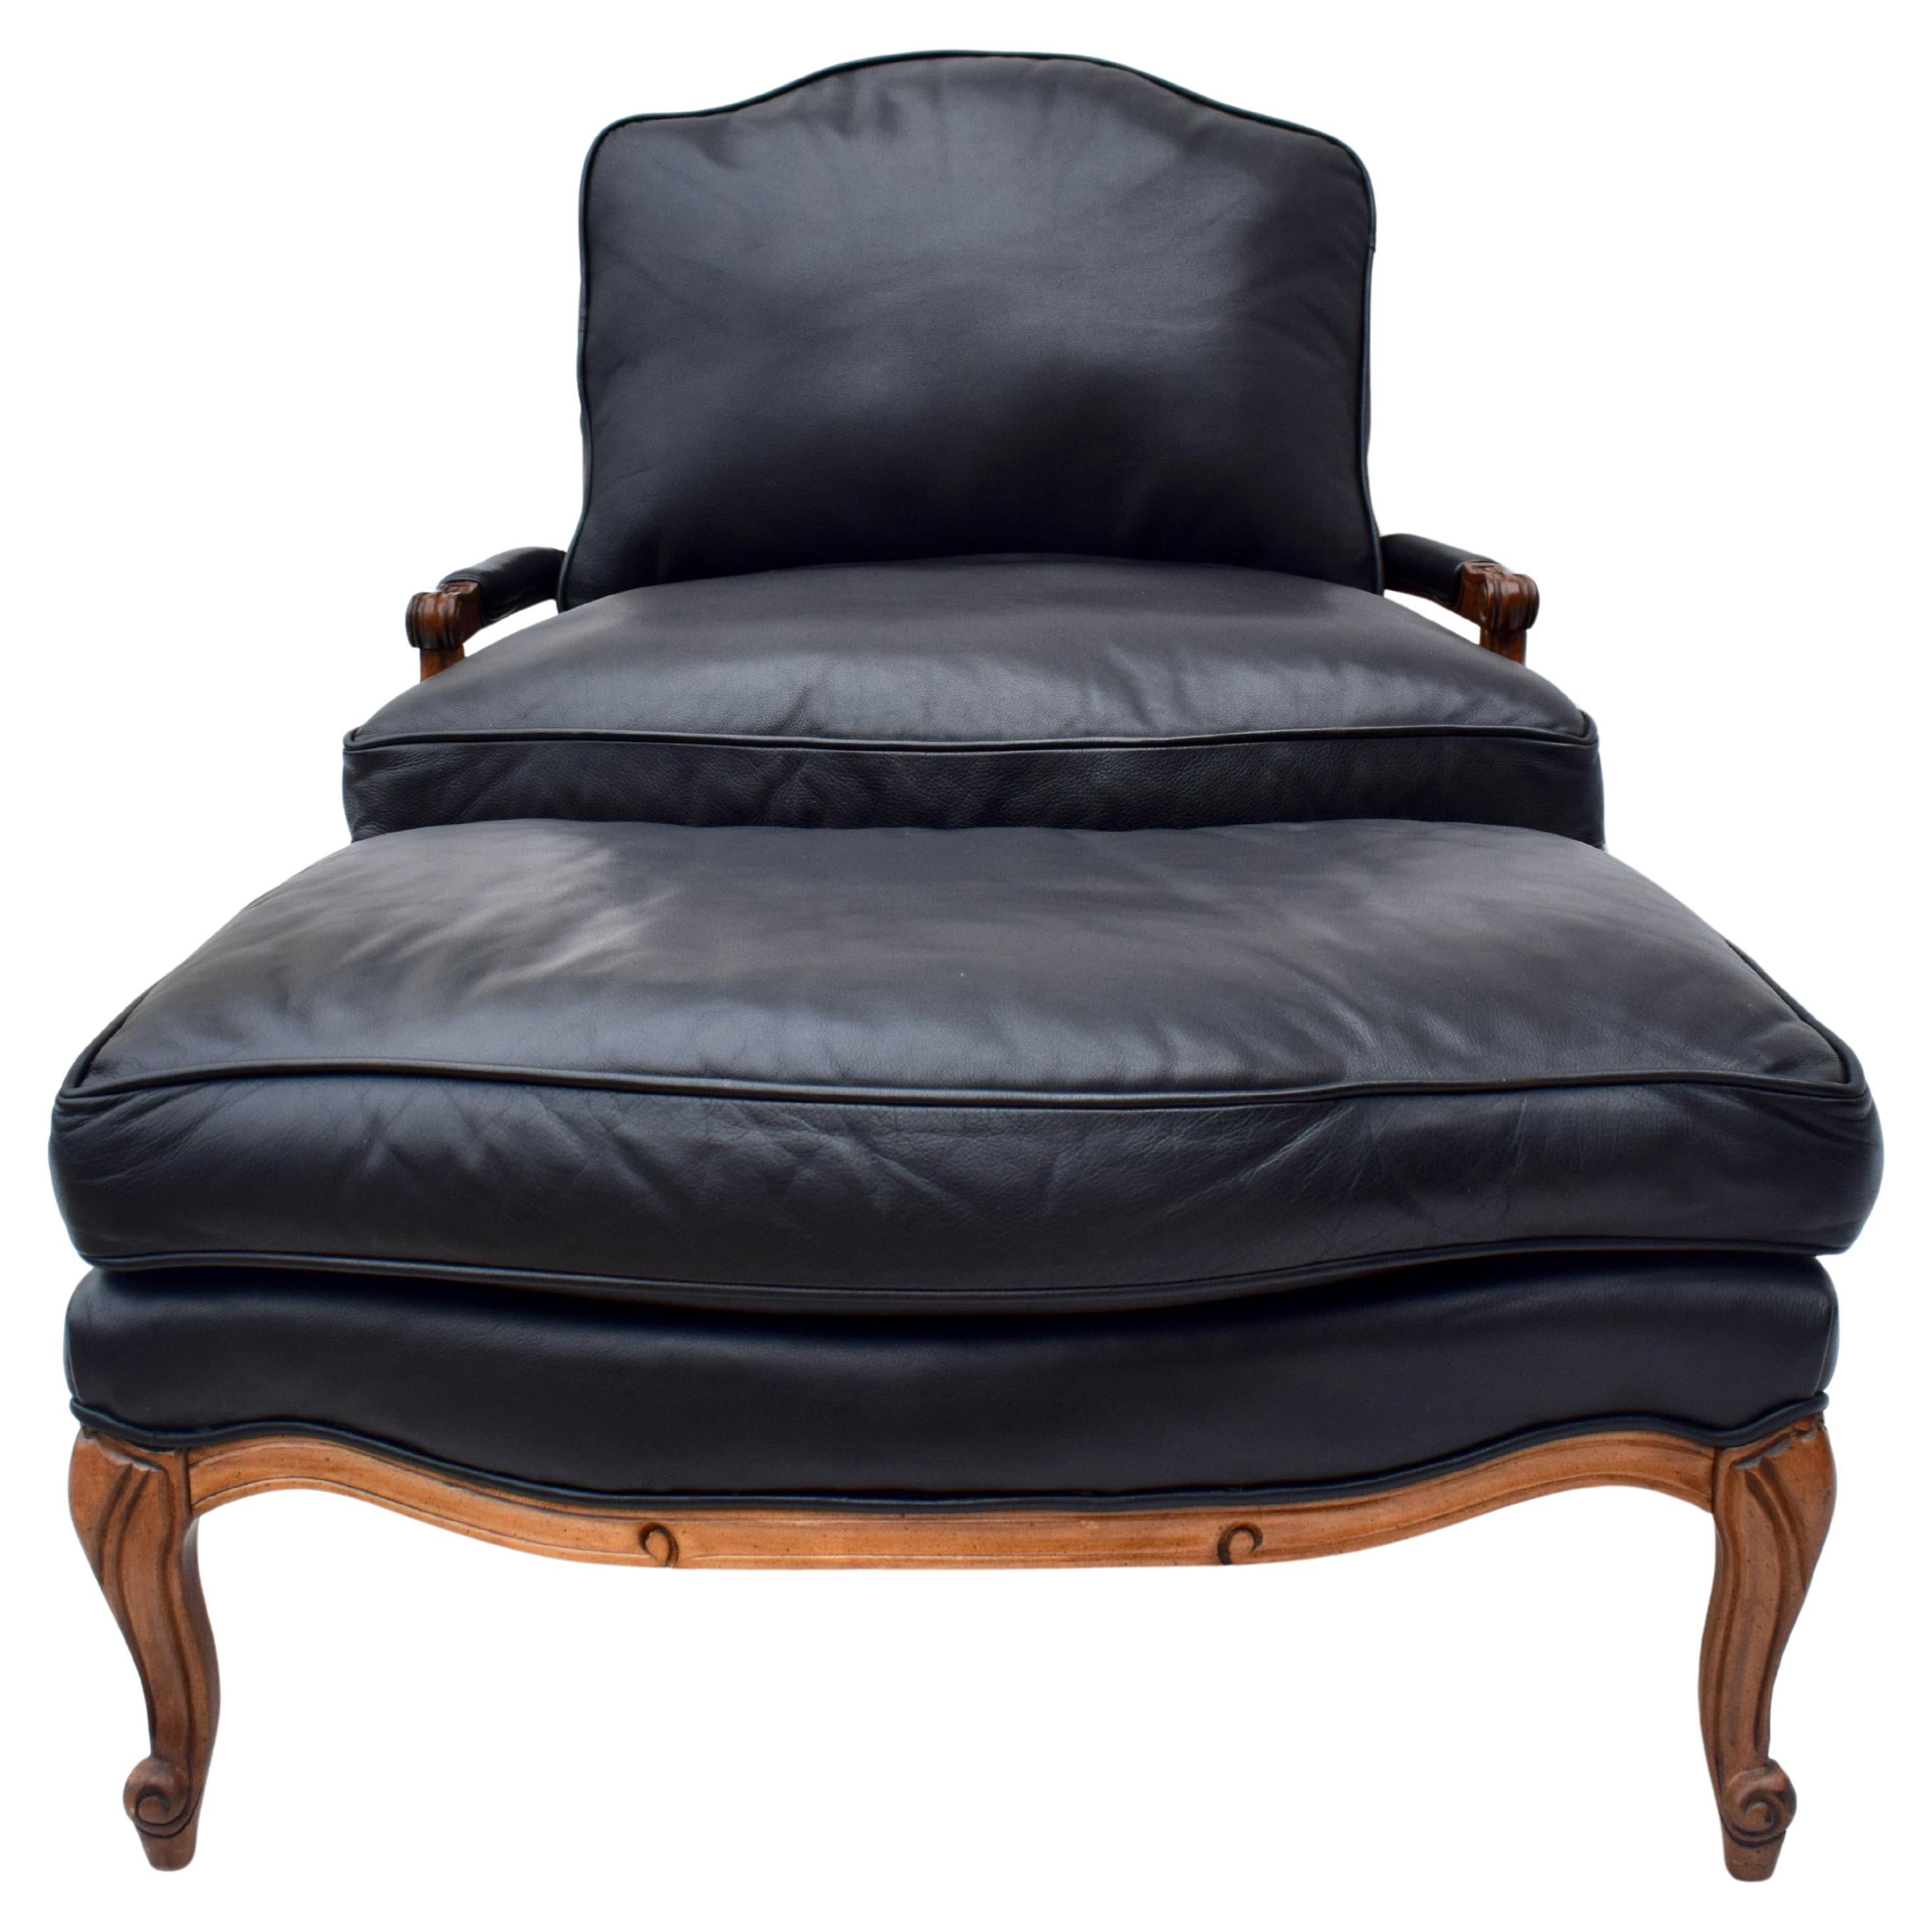 Supple Aniline black leather club chair and ottoman of generous proportions with warm contrasting carved walnut frame, arms, and legs. Ottoman dimensions:  22